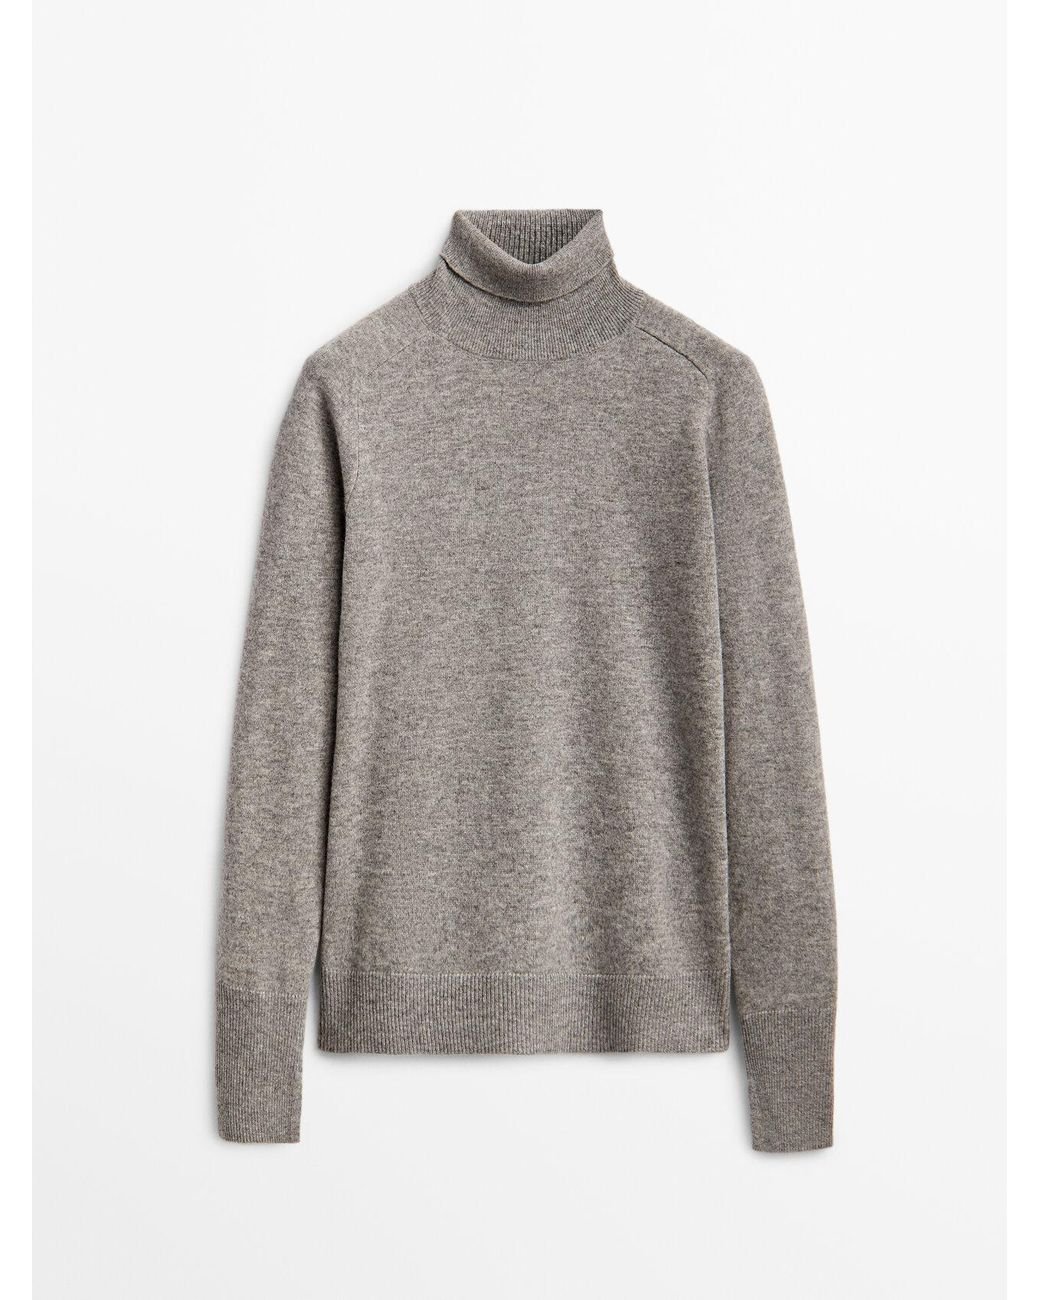 MASSIMO DUTTI Wool And Cashmere High Neck Sweater in Gray | Lyst